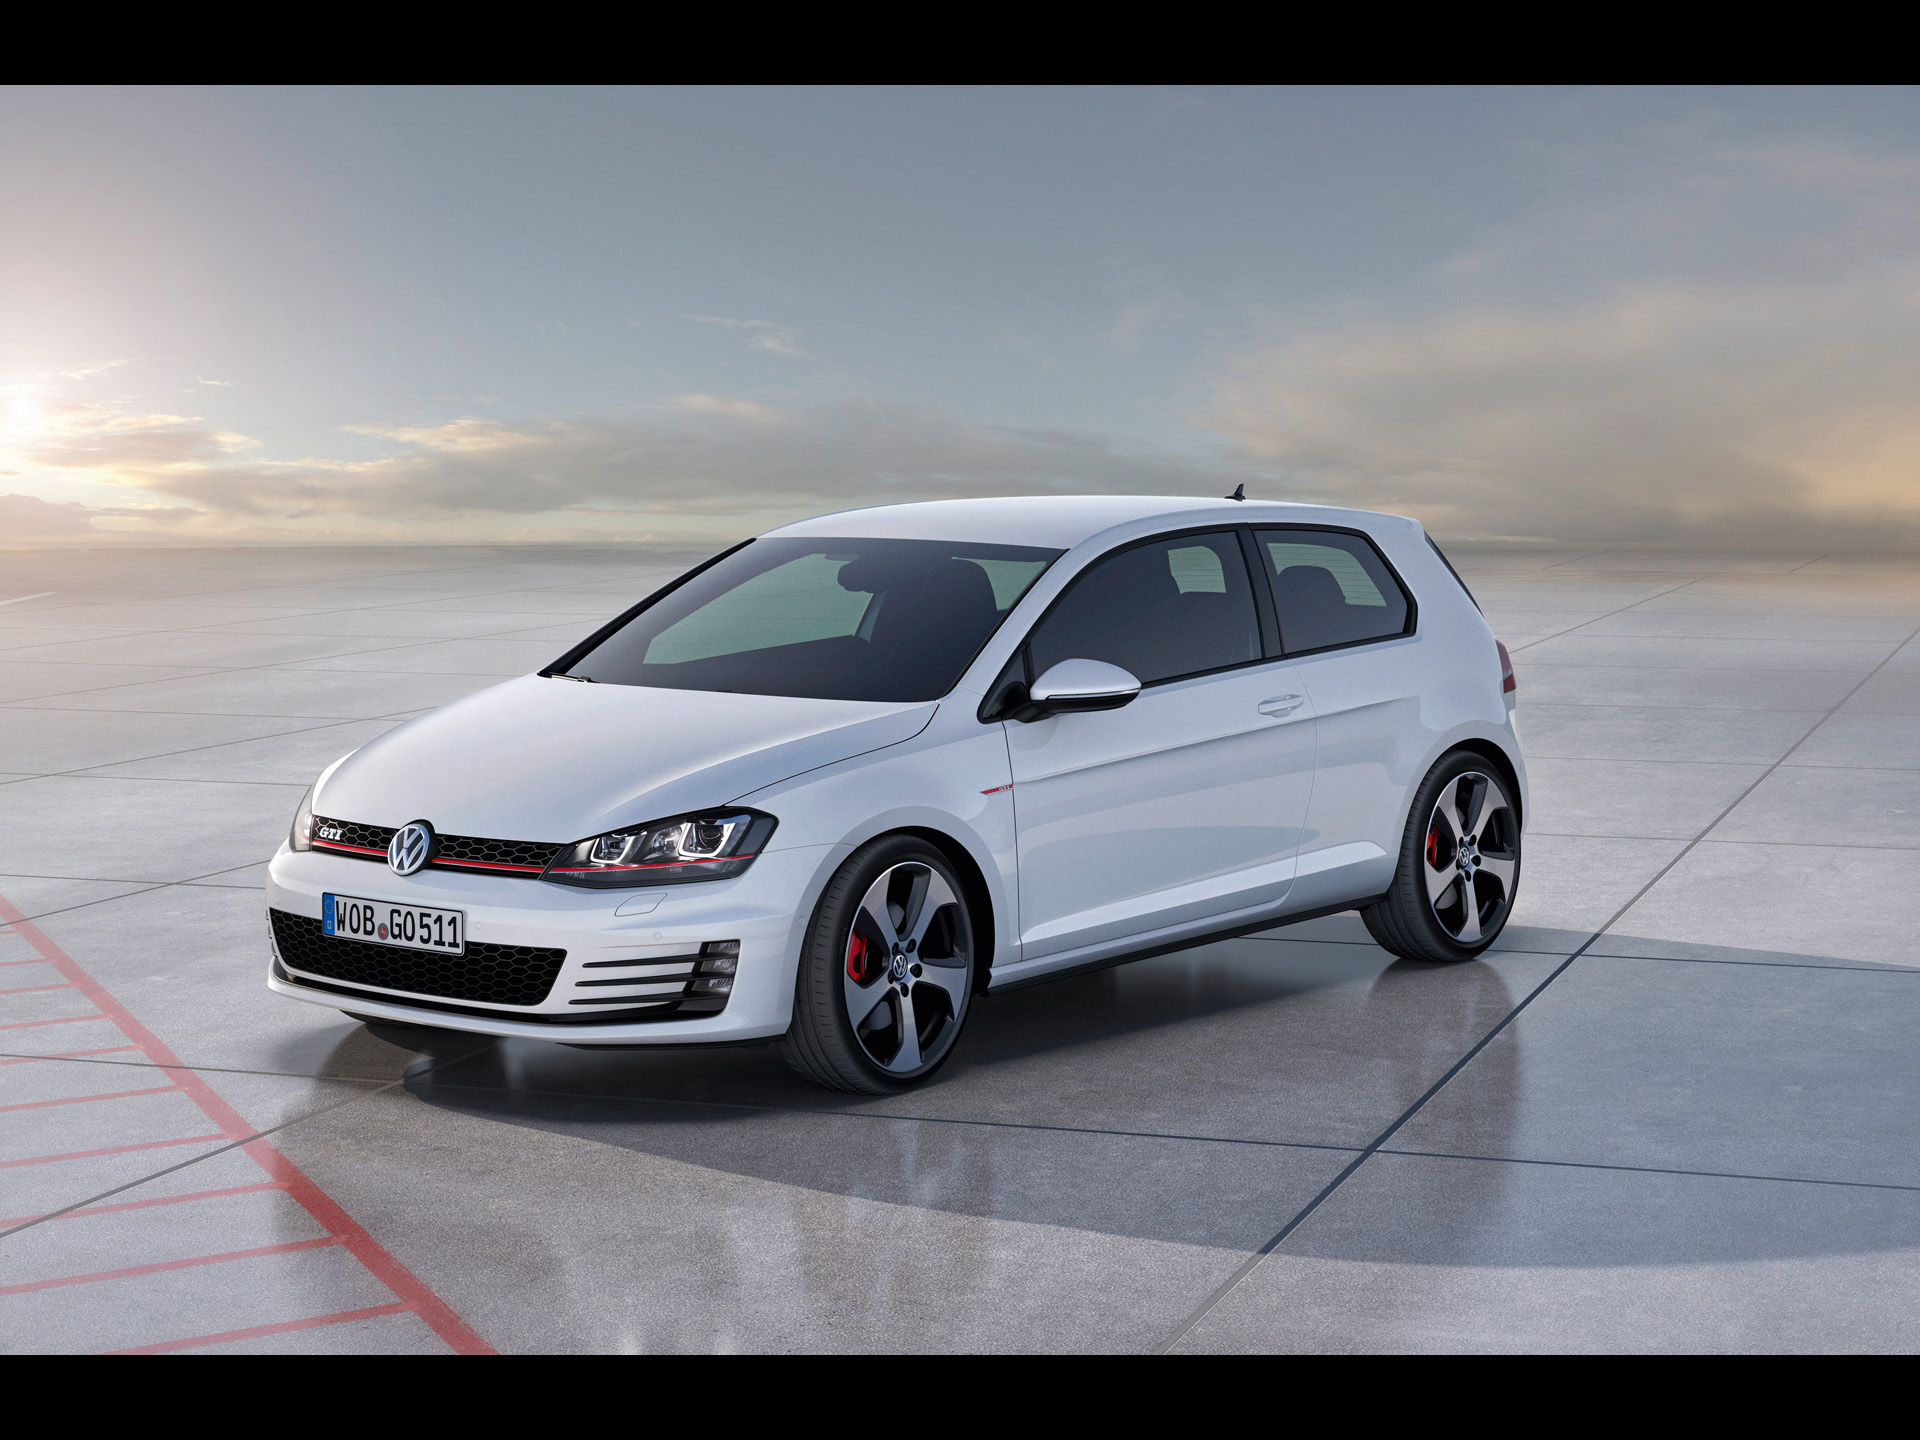 2012 volkswagen golf 7 gti concept static side angle wallpapers 35154